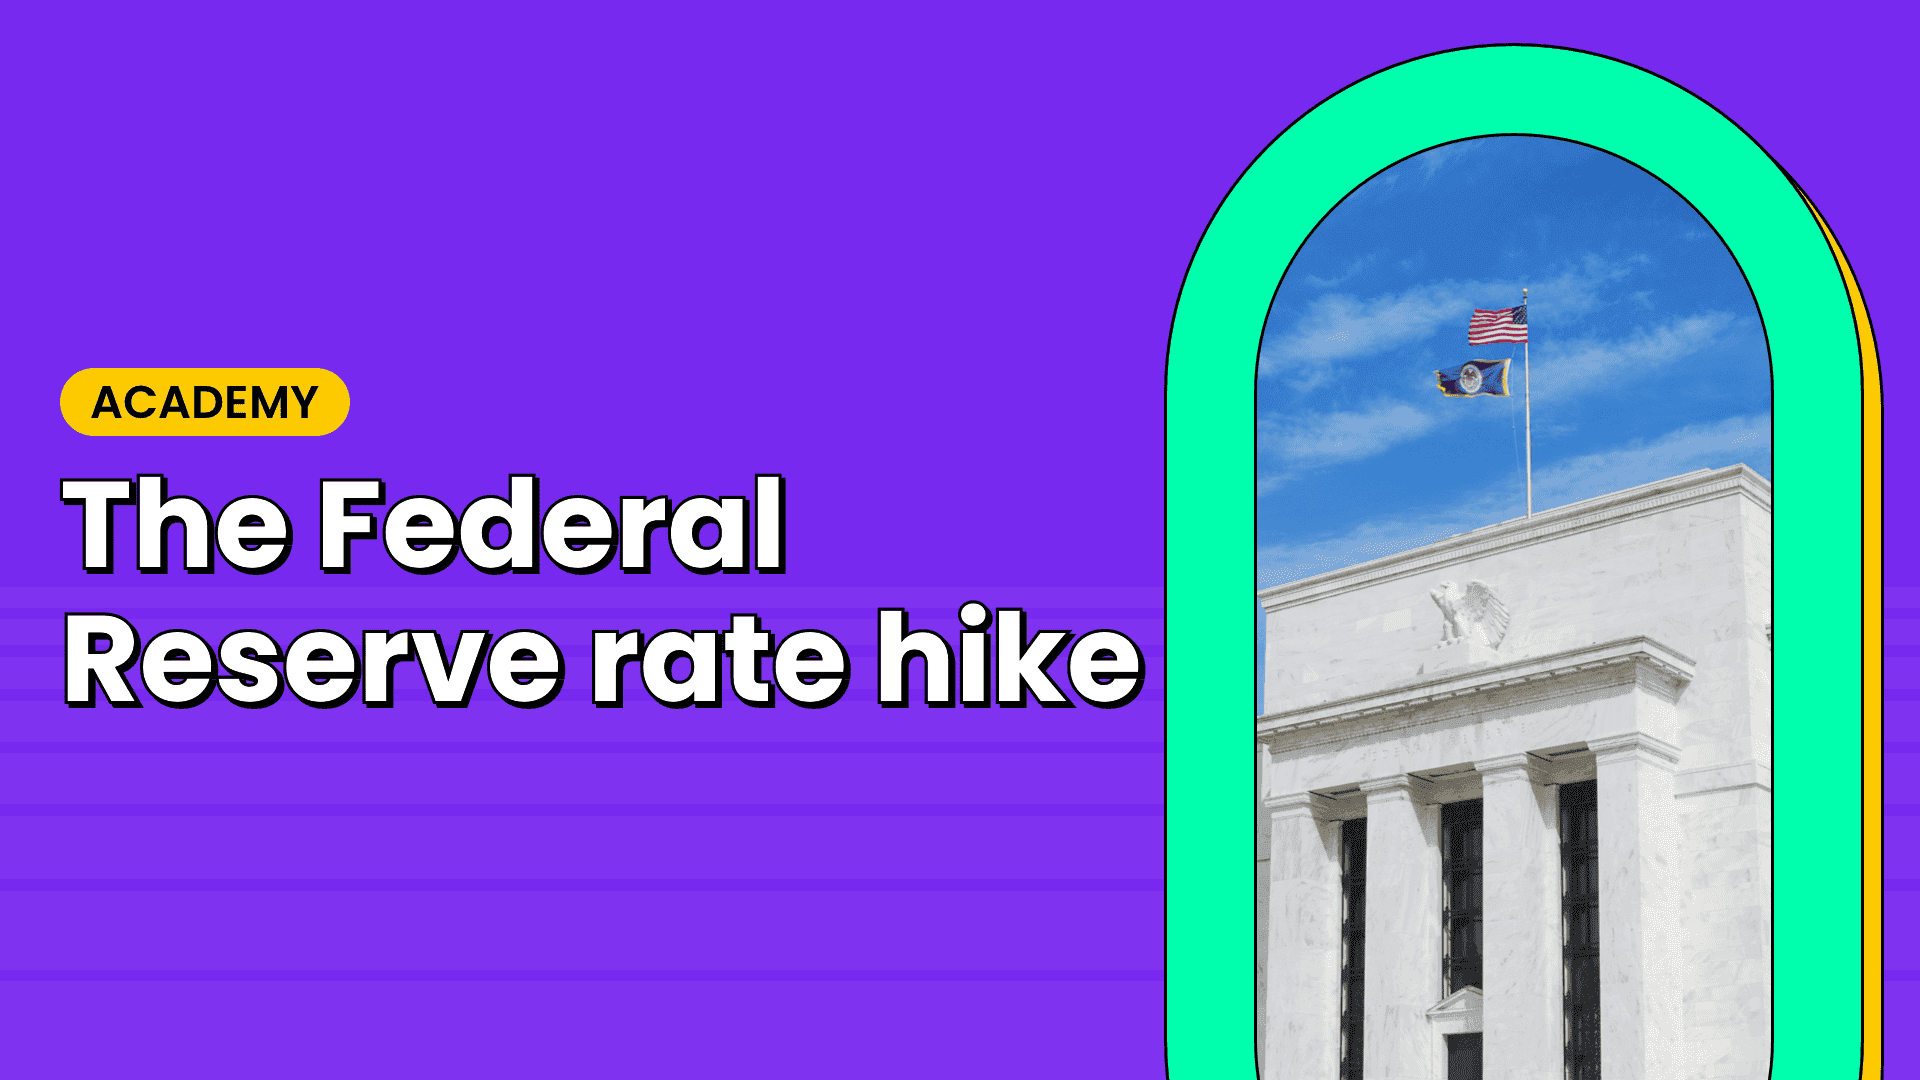 Fed-rate-hike-feature-image-1iKDY.png